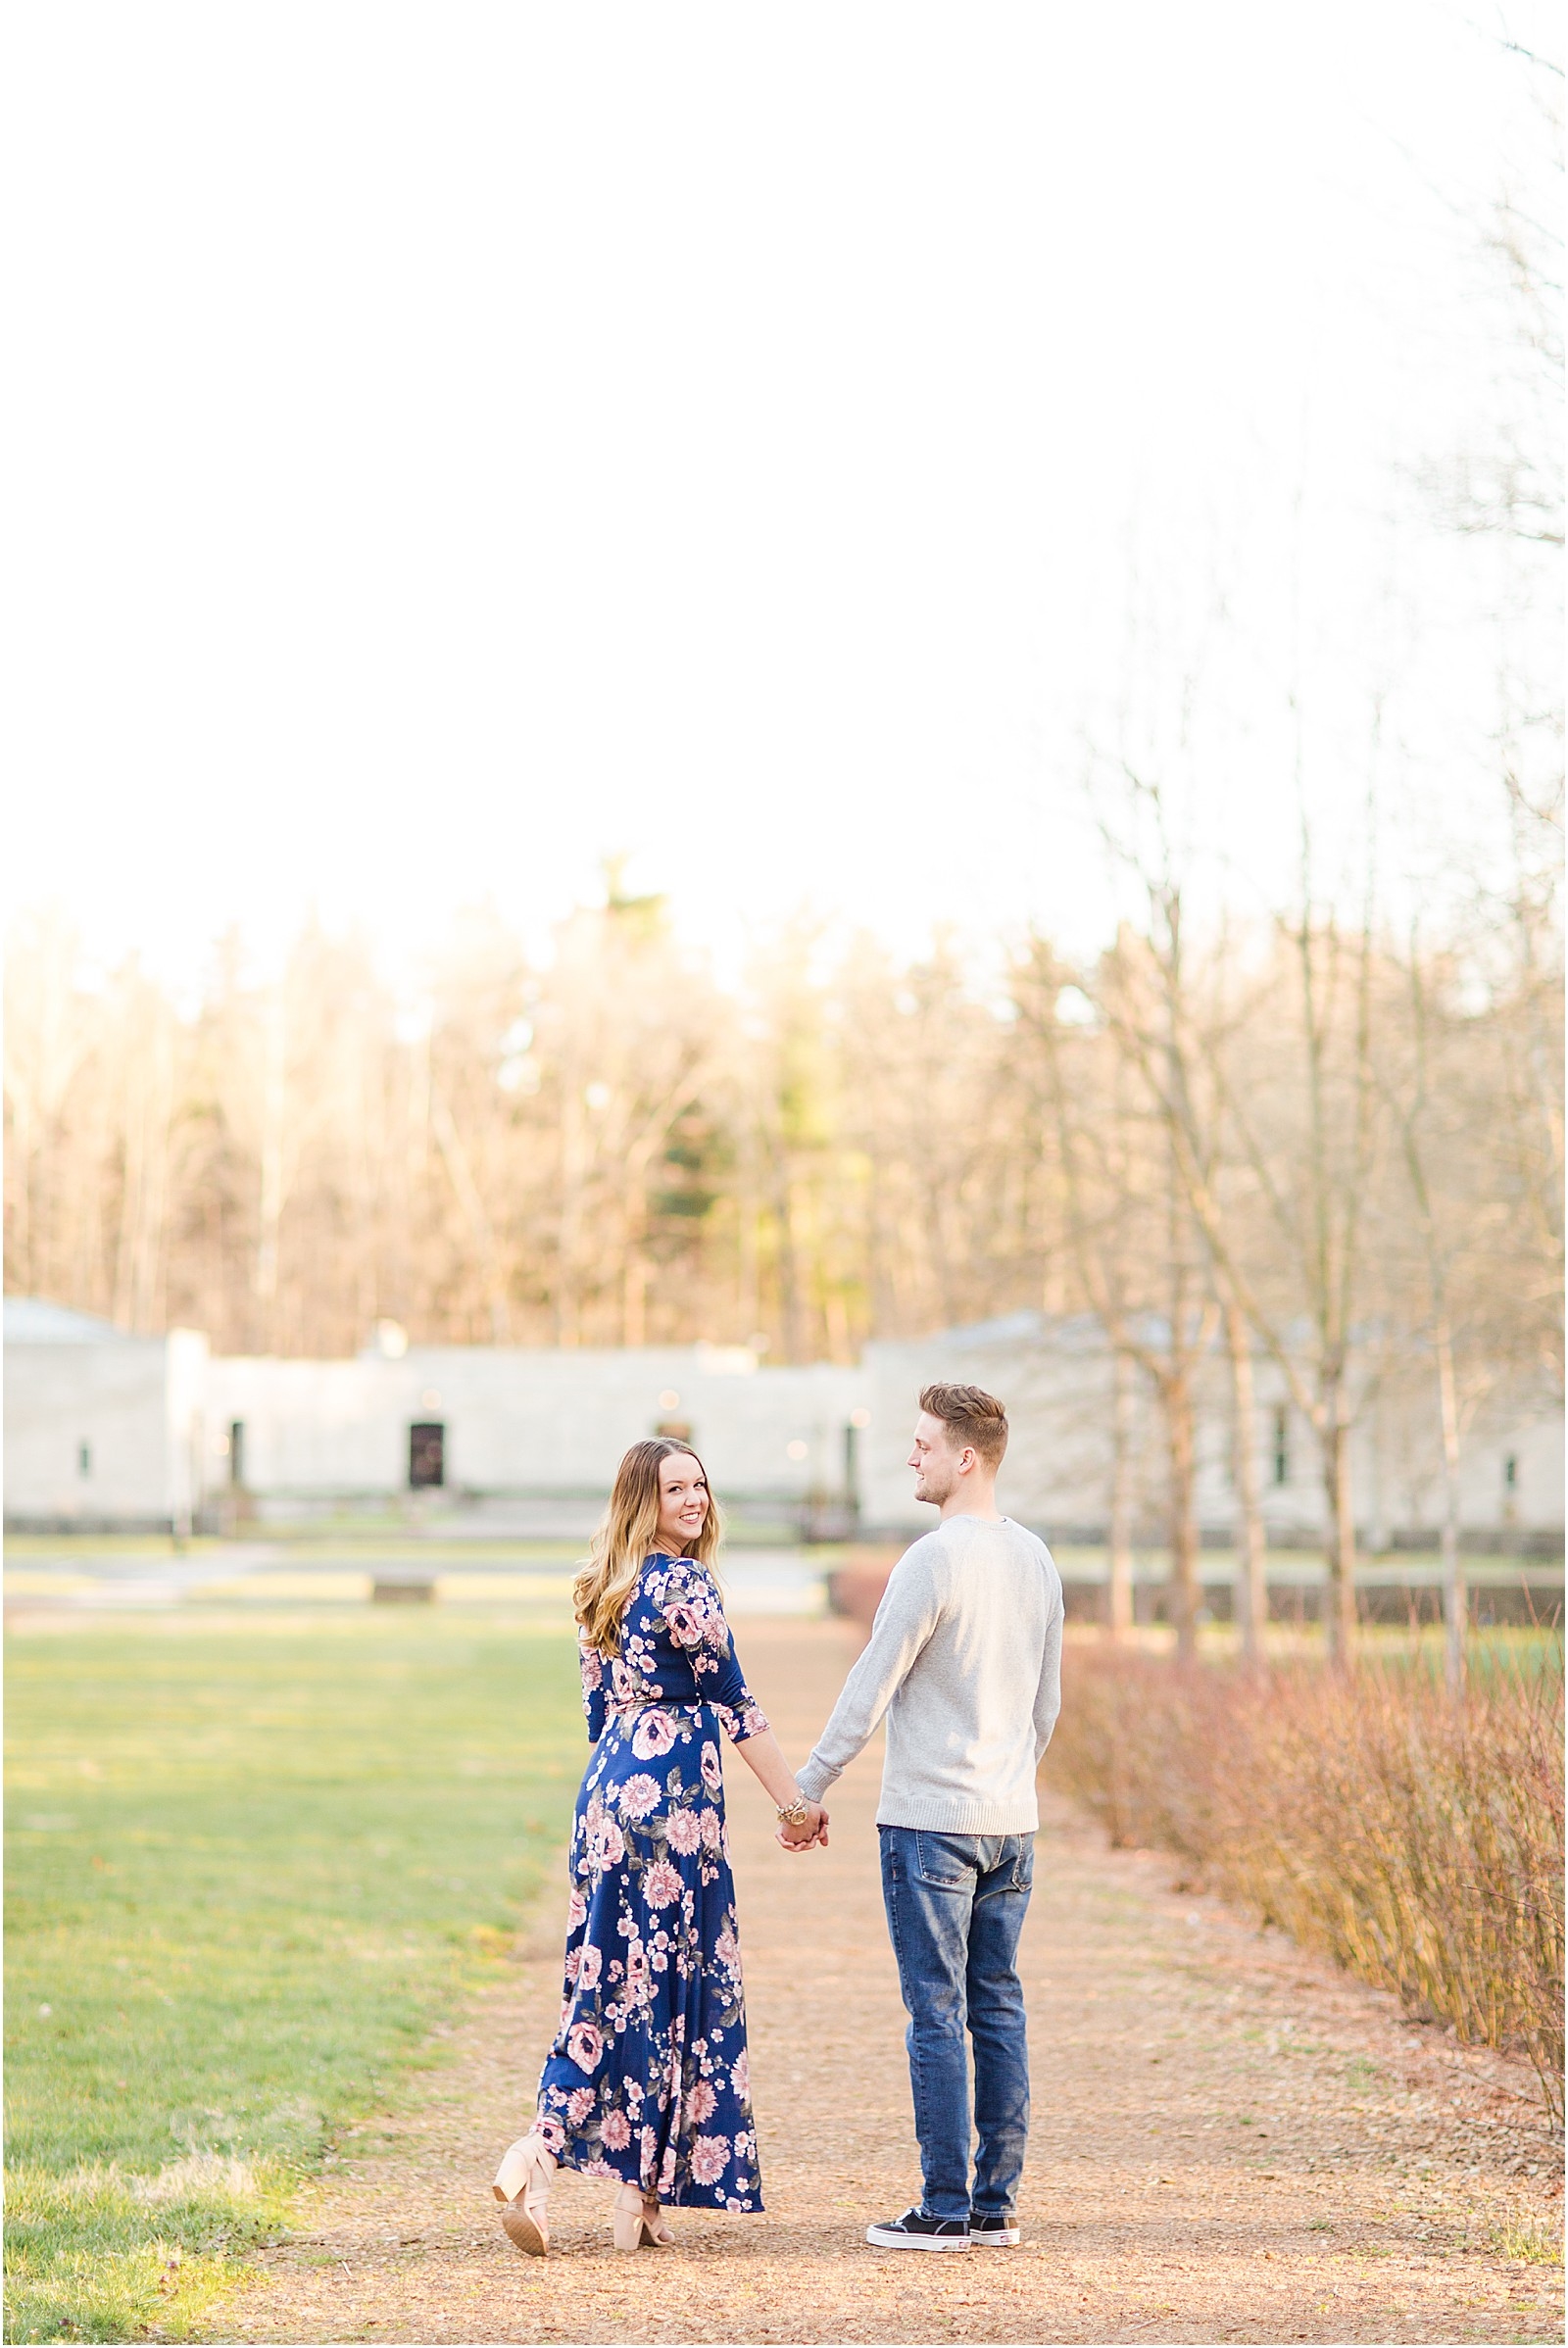 Rachel and Nick | Lincoln State Park Engagement Session 020.jpg